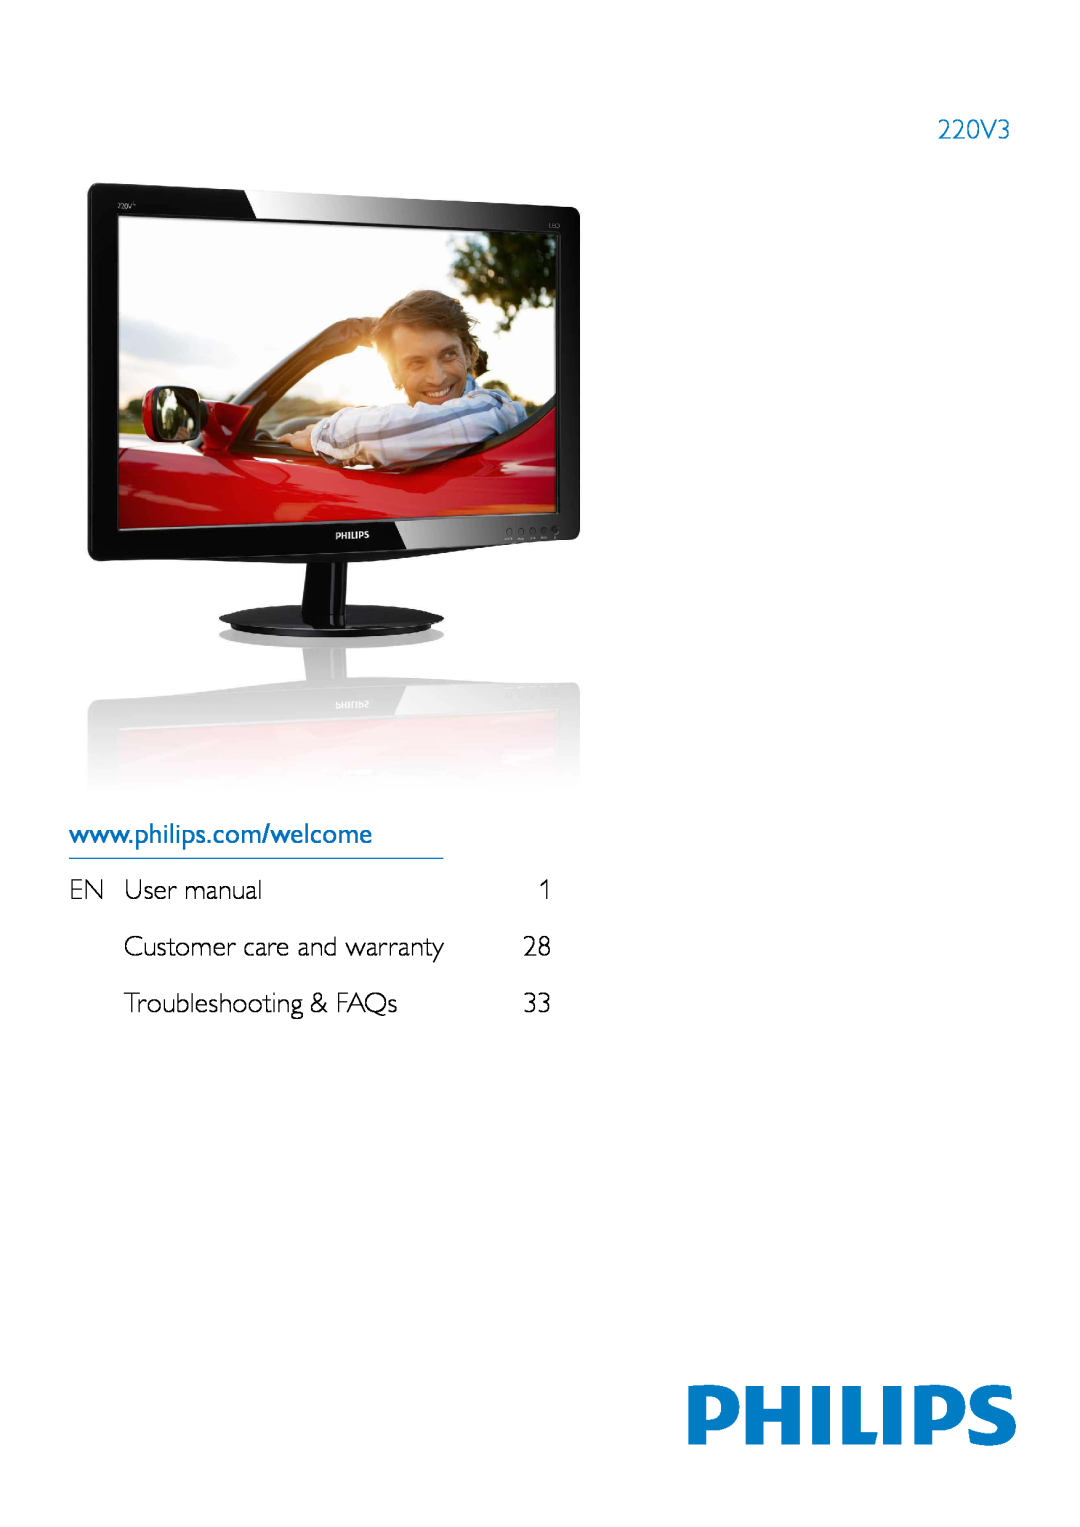 Philips 220V3 user manual EN User manual, Customer care and warranty, Troubleshooting & FAQs 